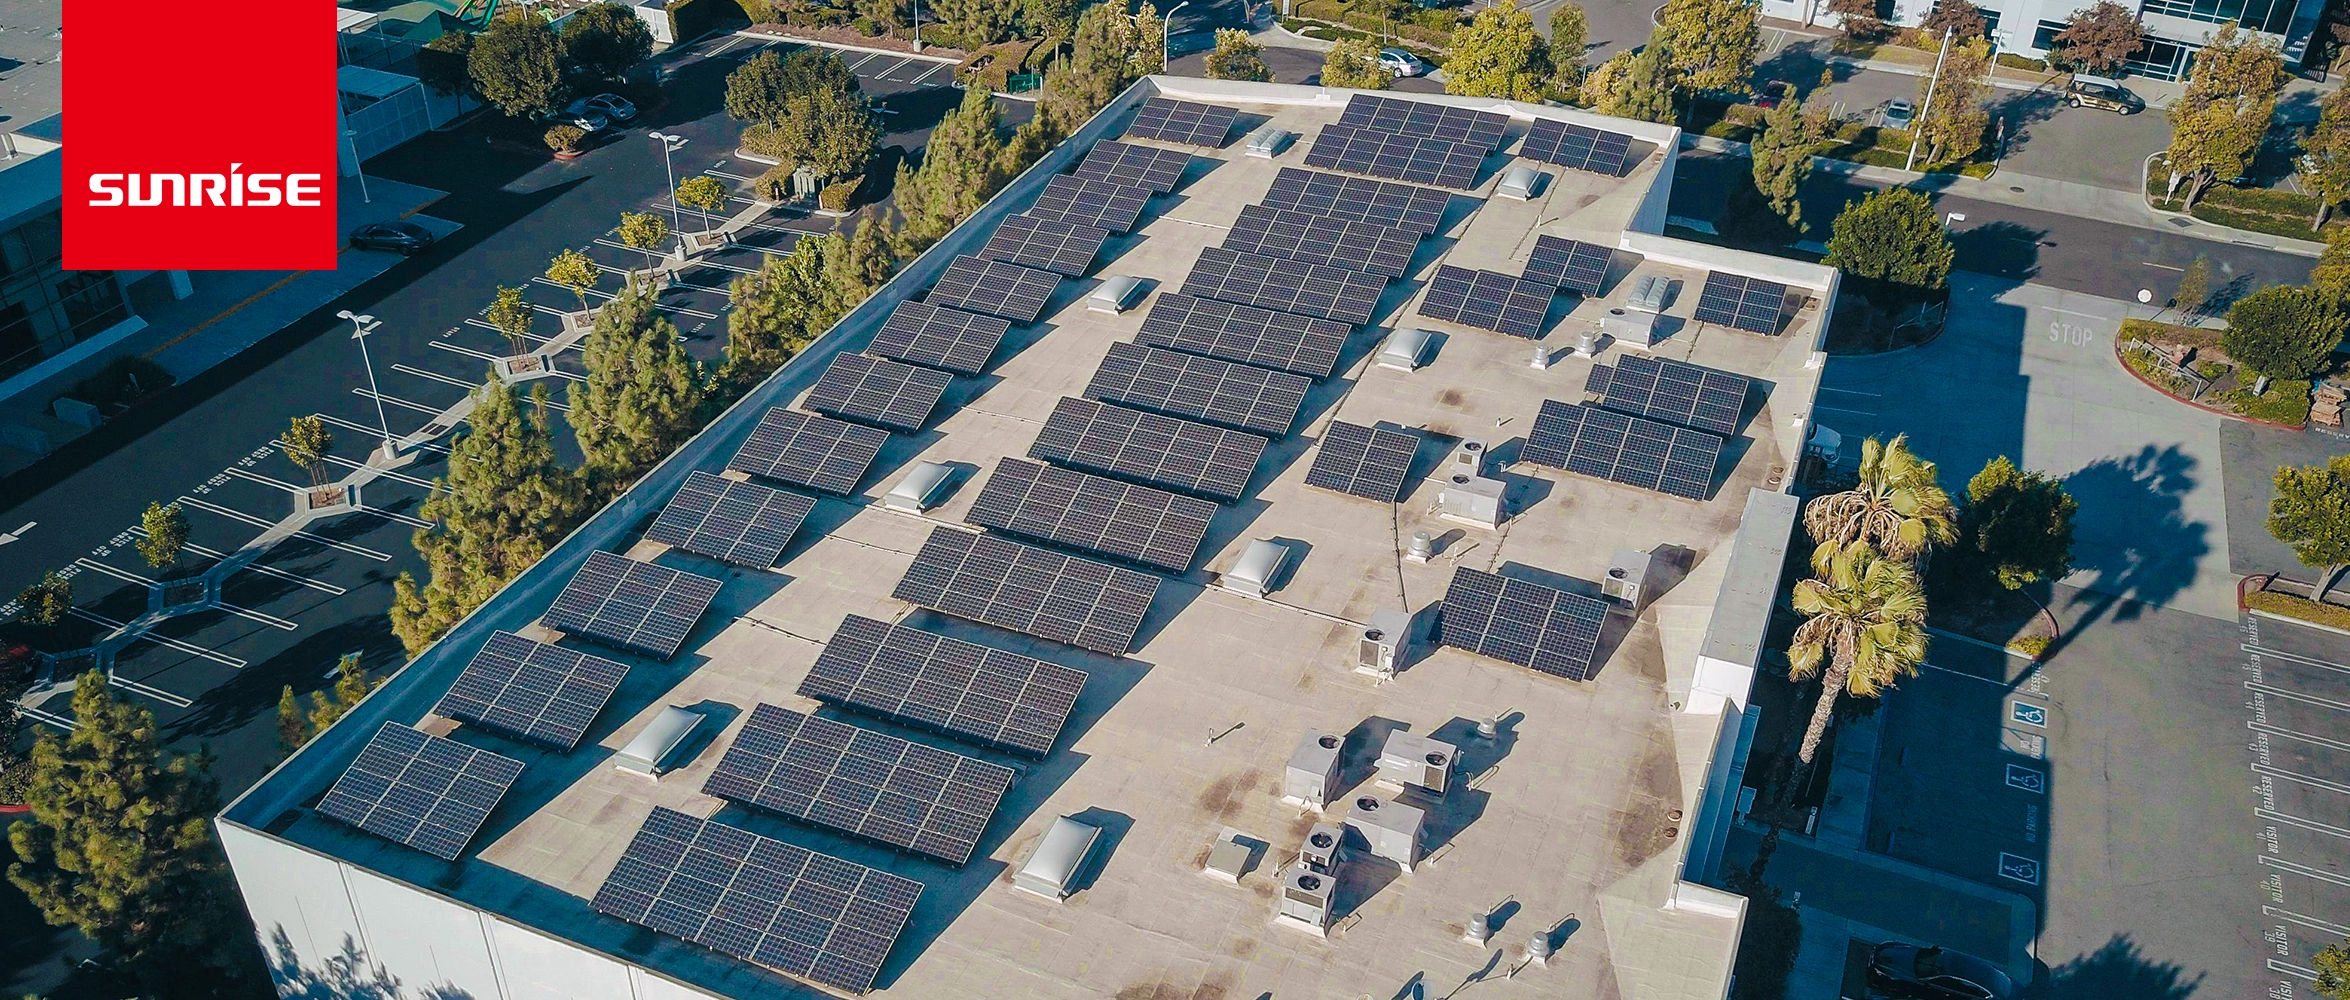 The Advantages of On-Grid Solar PV Systems